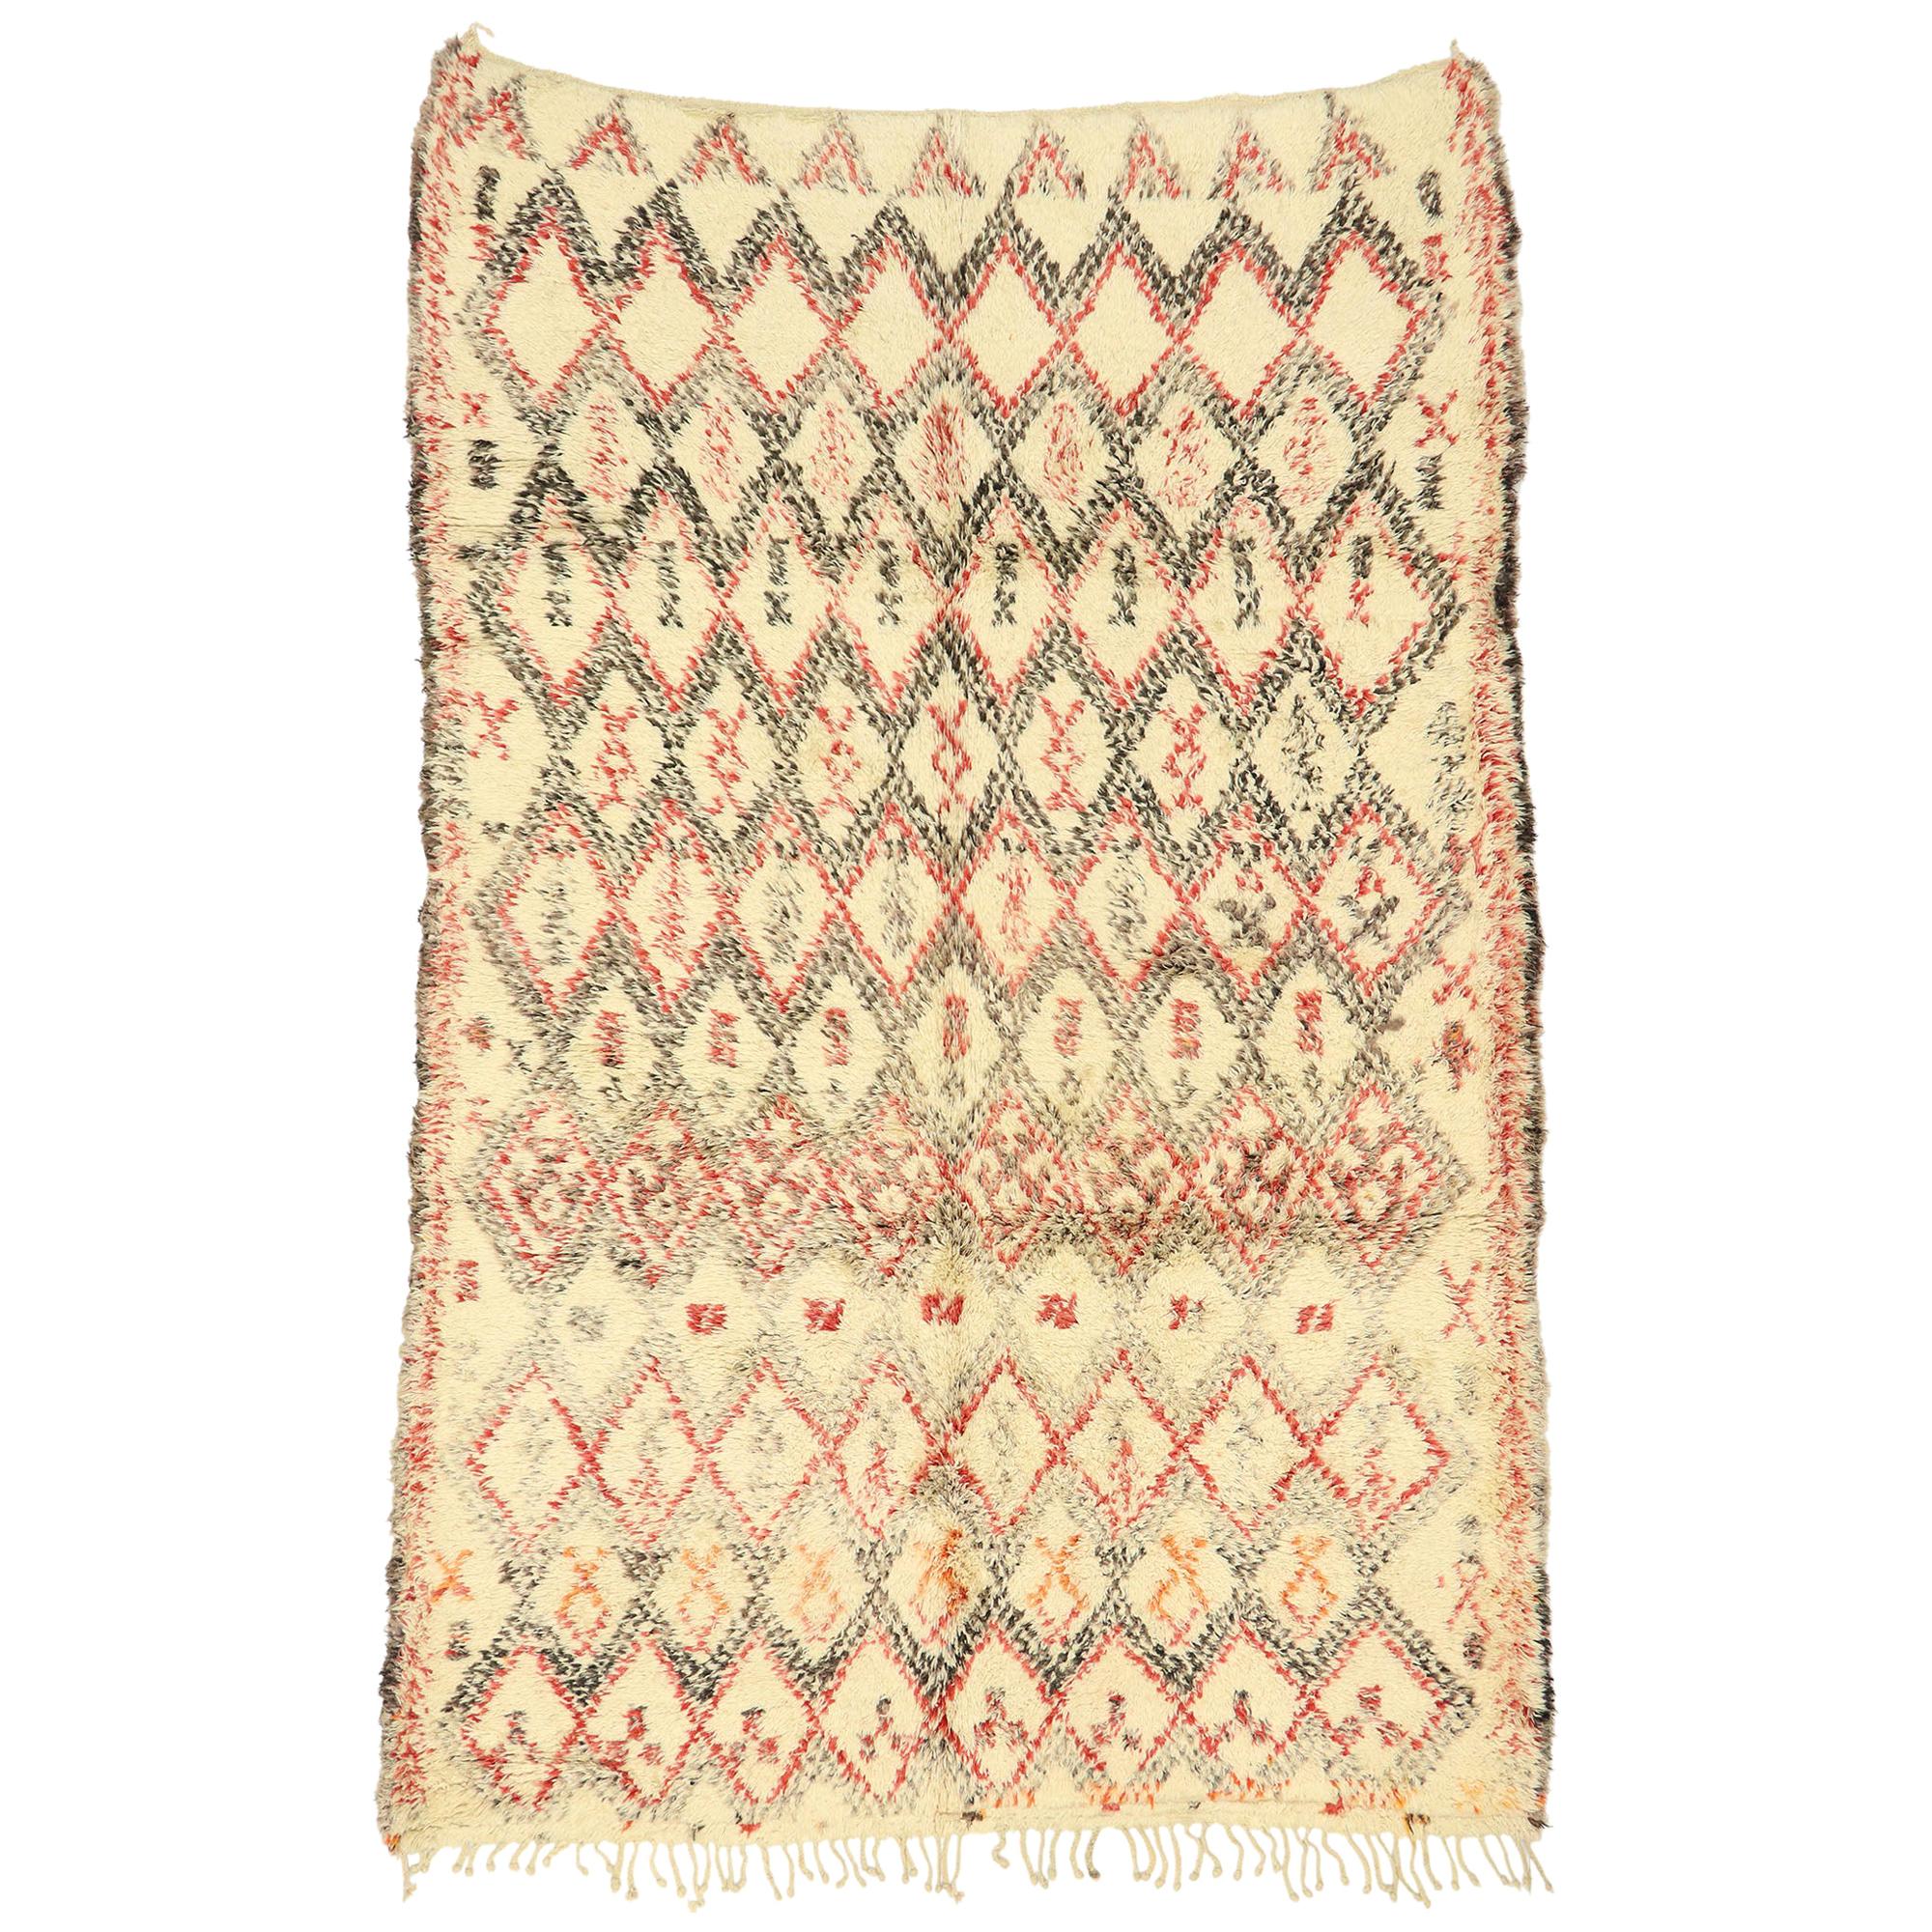 Vintage Beni Ouarain Moroccan Rug with Mid-Century Modern Style